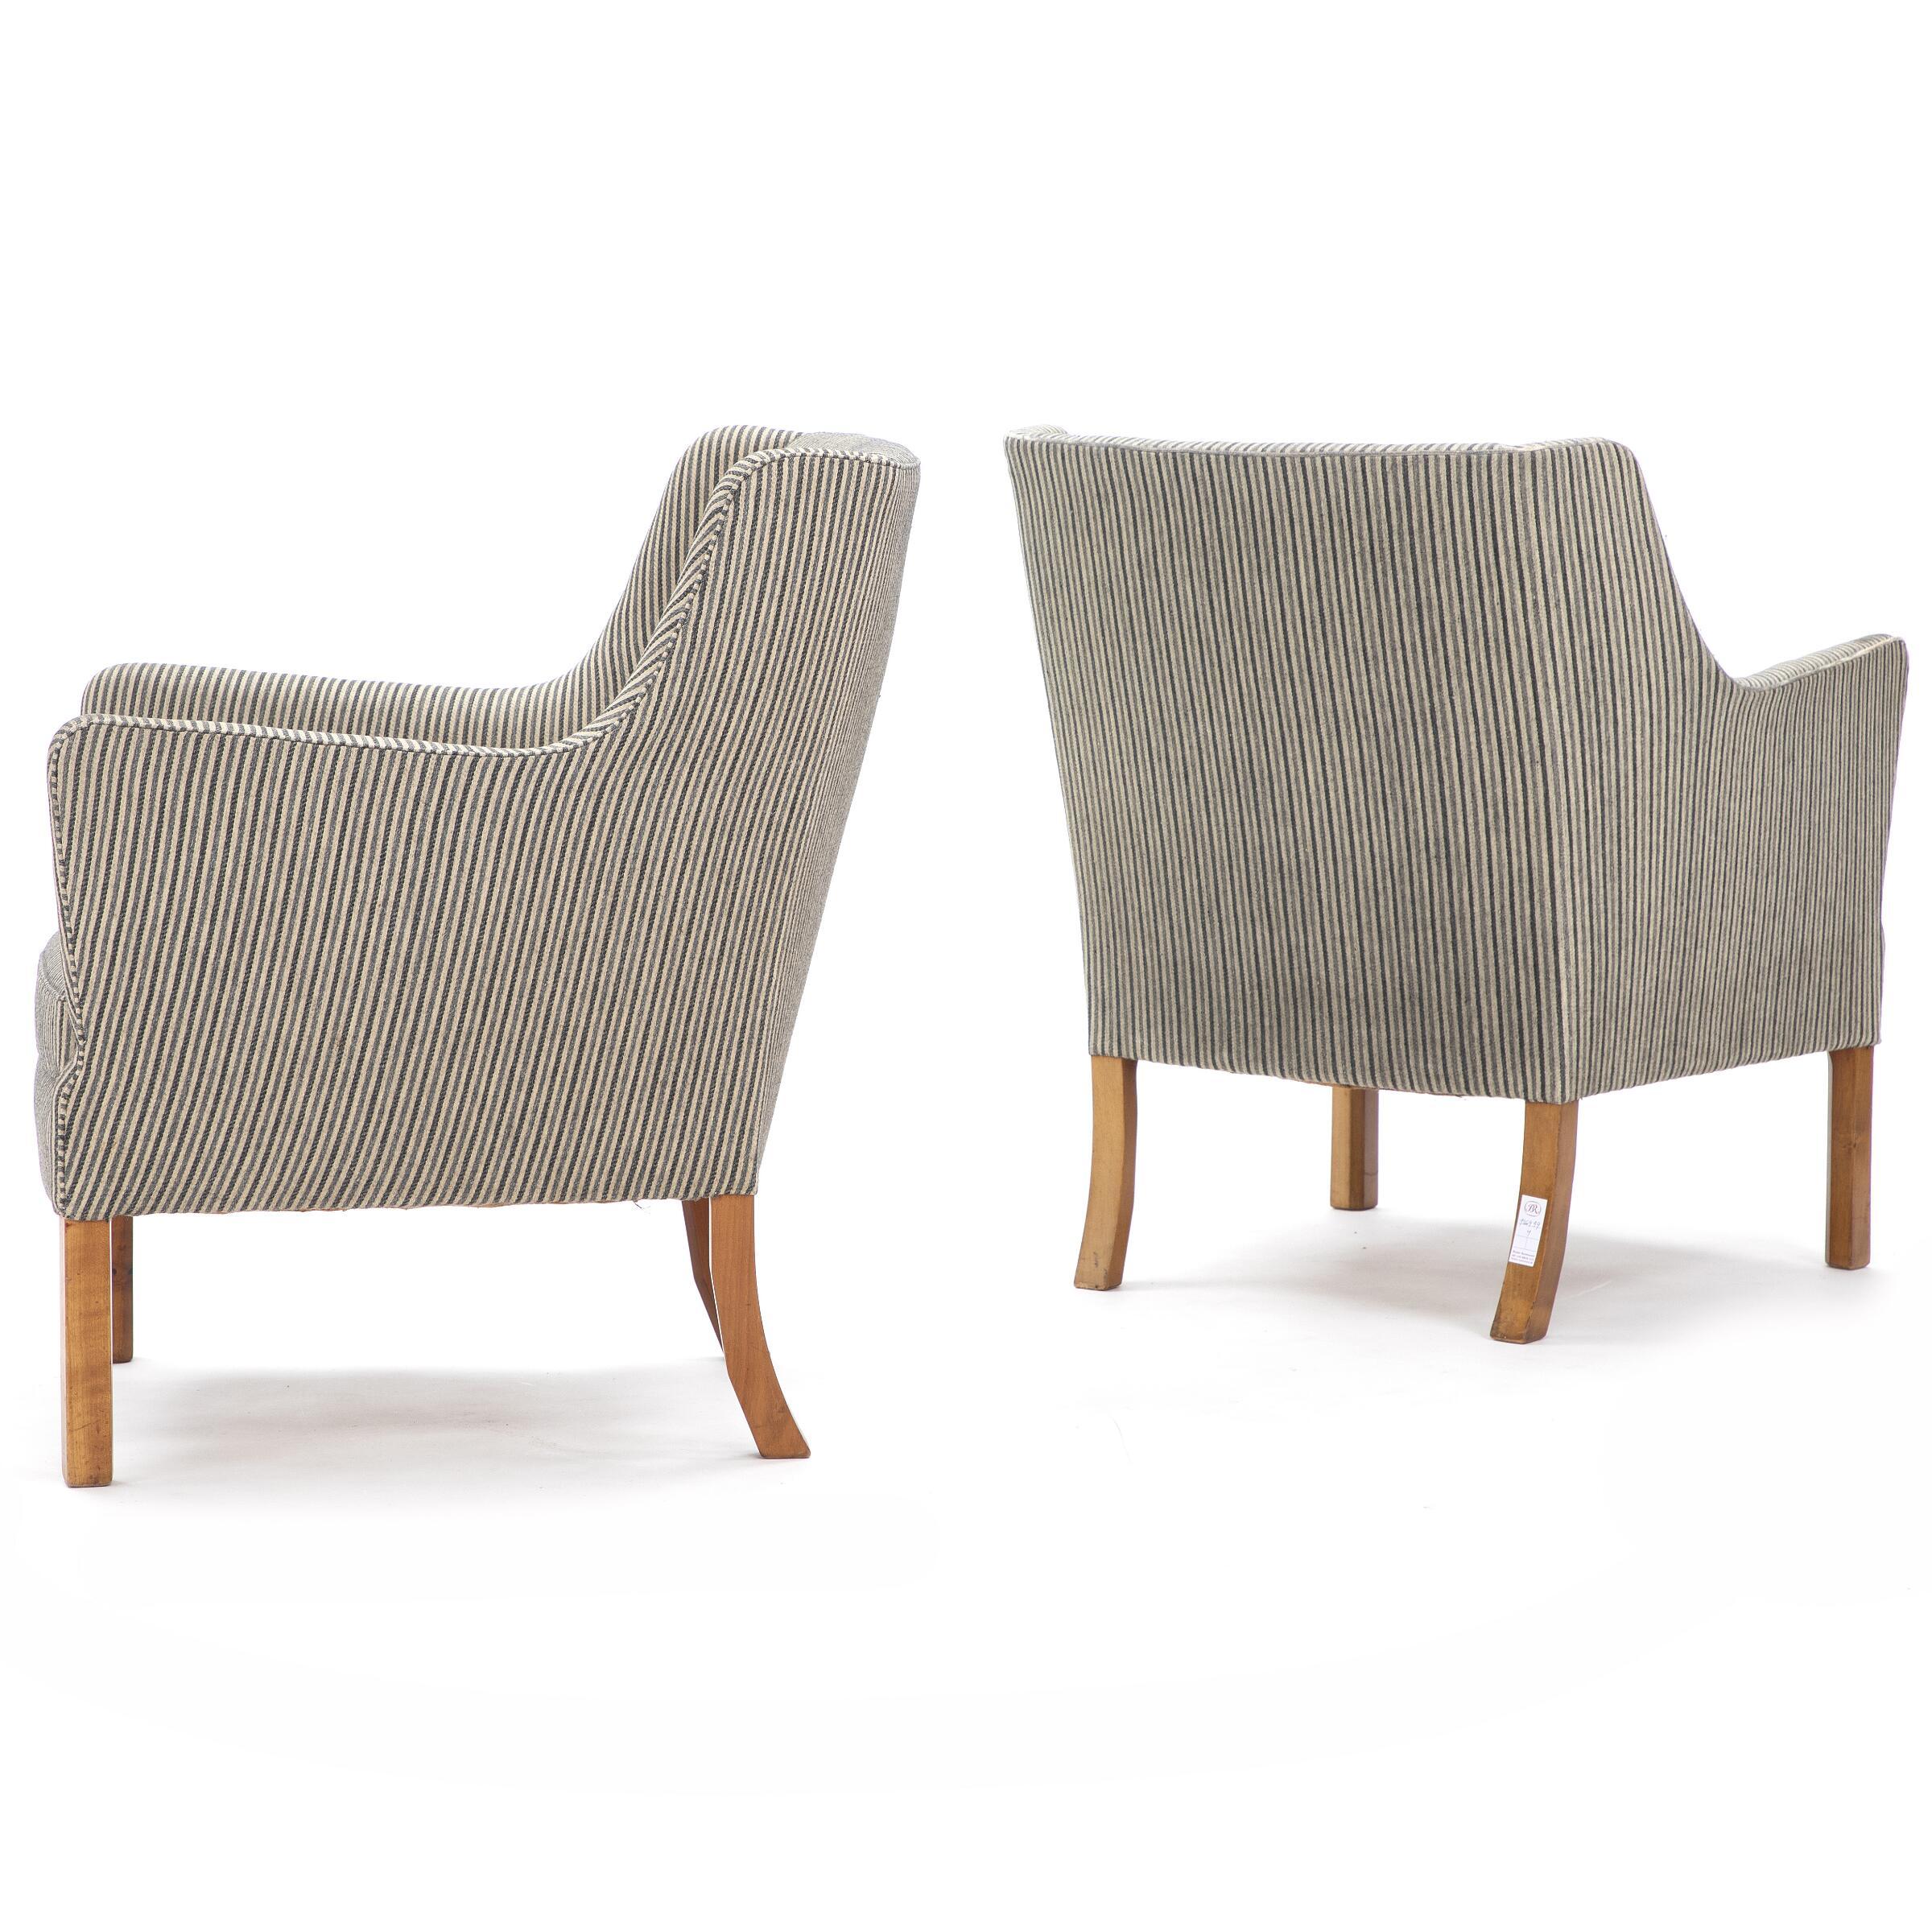 Ejner Larsen: pair of striped wool and mahogany easy chairs. Designed 1945. Made by cabinetmaker Jacob Kjær. 

Wear due to age and use, including scratches and marks on legs. One chair missing button in back. Wool with stains and dirt. One chair